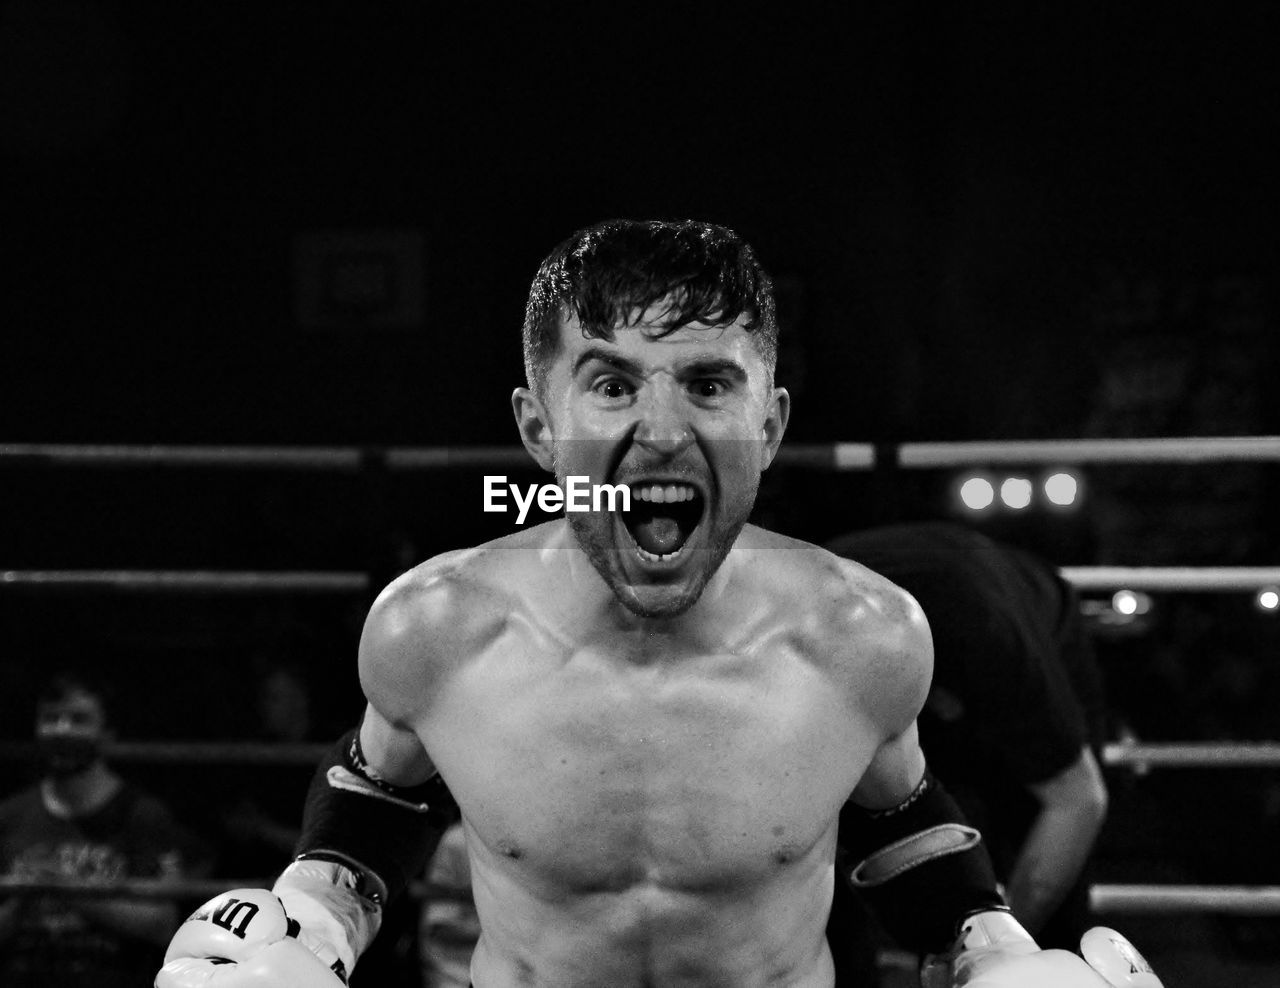 Portrait of shirtless boxer shouting while standing in boxing ring